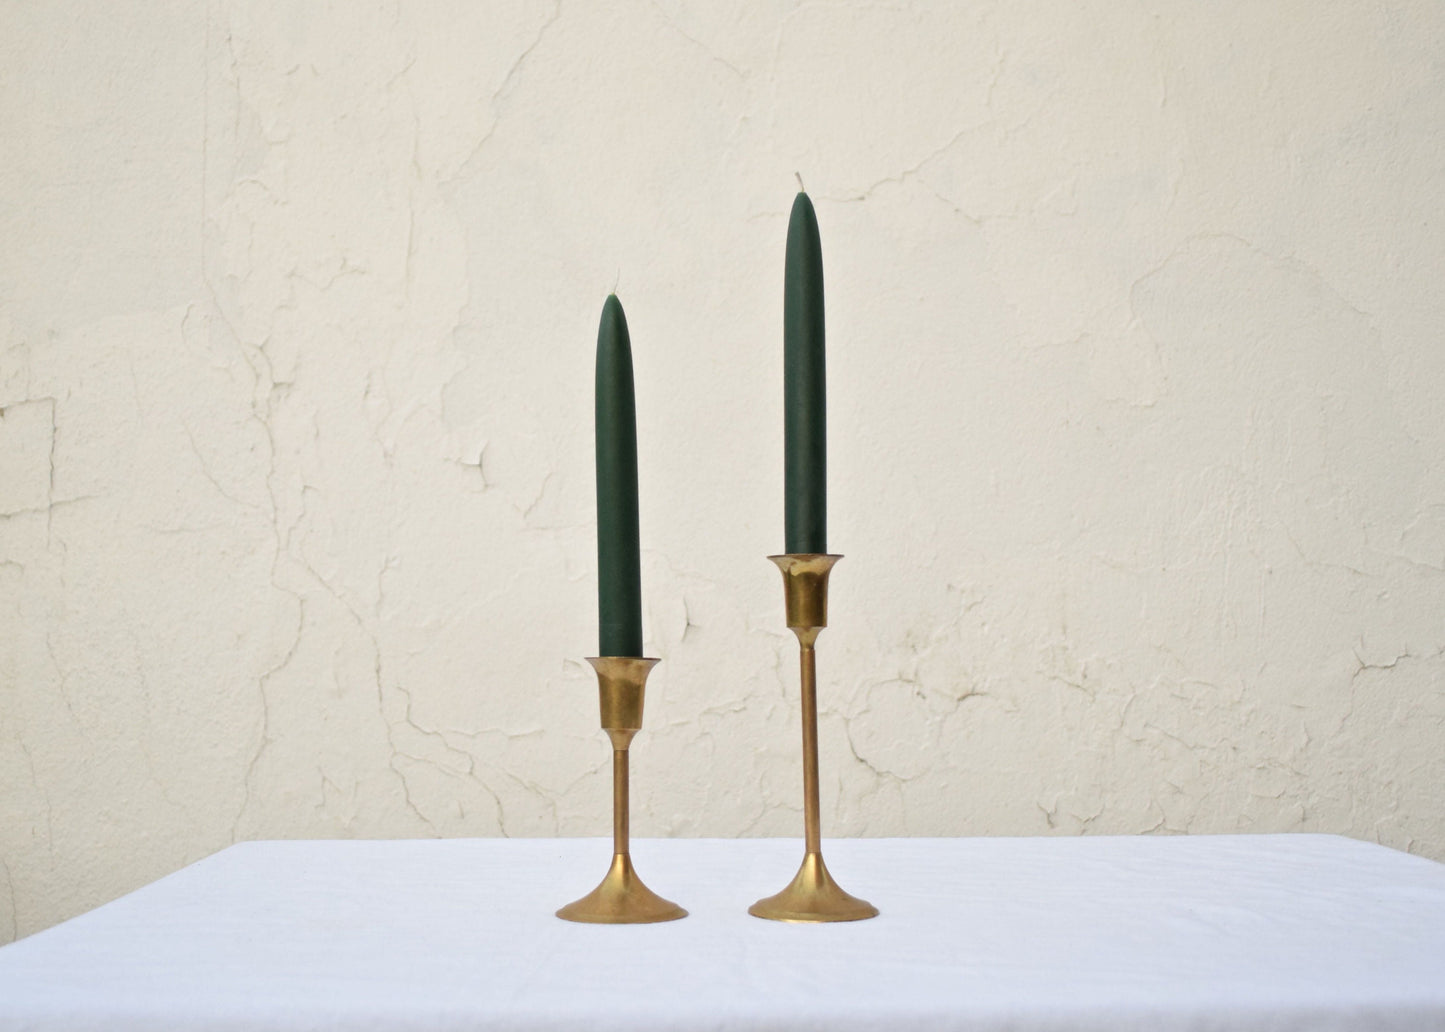 Forest Green Beeswax Taper Candles, Pair of 2 // Tapers, Beeswax Candles, 8" Tapers, Eco Friendly, Candles